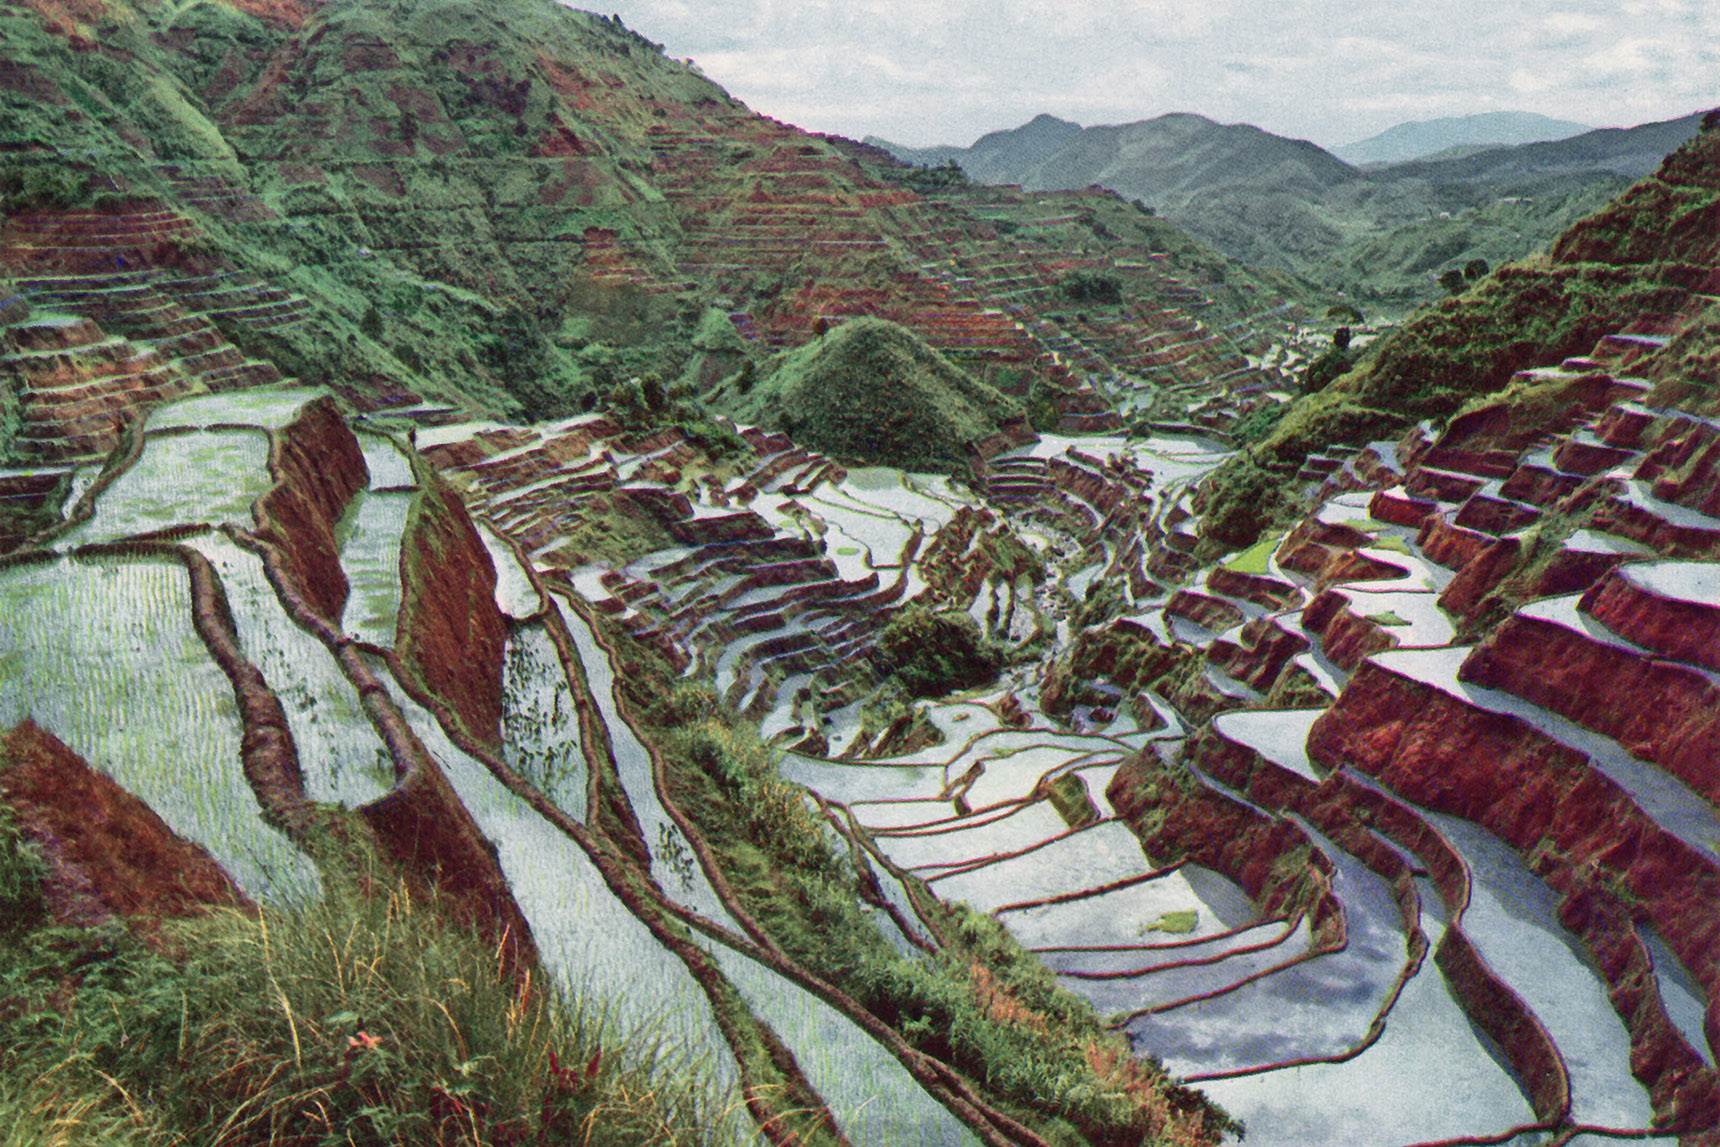 a landscape view of the terraced slopes from the 1970s.